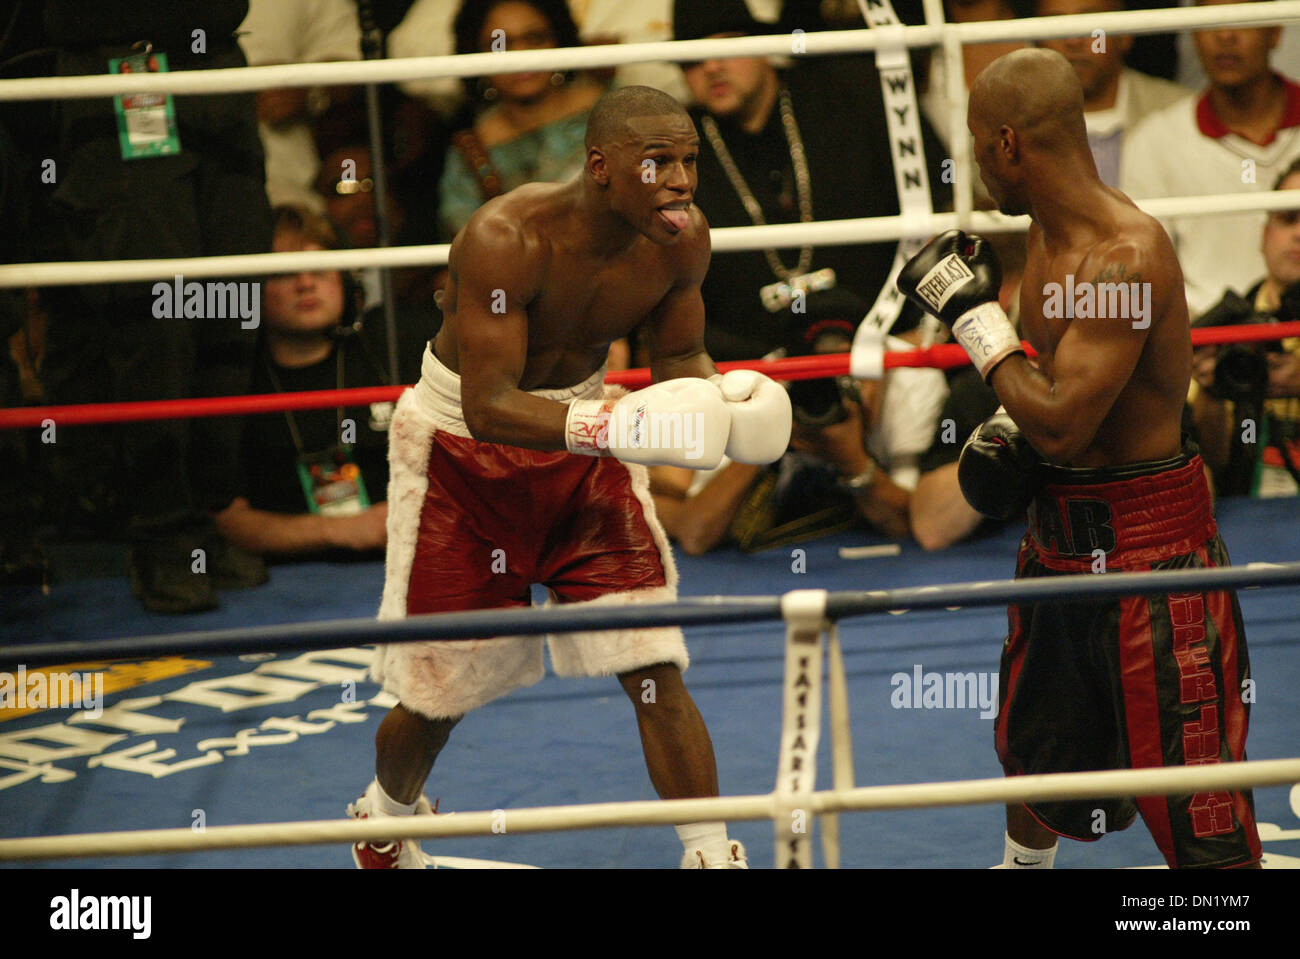 Apr 08, 2006; Las Vegas, NV, USA; FLOYD MAYWEATHER JR. vs ZAB JUDAH IBF Welterweight Fight. When JUDAH Punched MAYWEATHER below the belt  ROGER MAYWEATHER trainer & Uncle jumped into the ring & went after ZAB JUDAH. FLOYD MAYWEATHER JR ( L) taunts by sticking his tongue out at ZAB JUDAH (R) red & black trunks. Nevada athletic Chief Inspector TONY LATO  & inspectors in burgandy jack Stock Photo